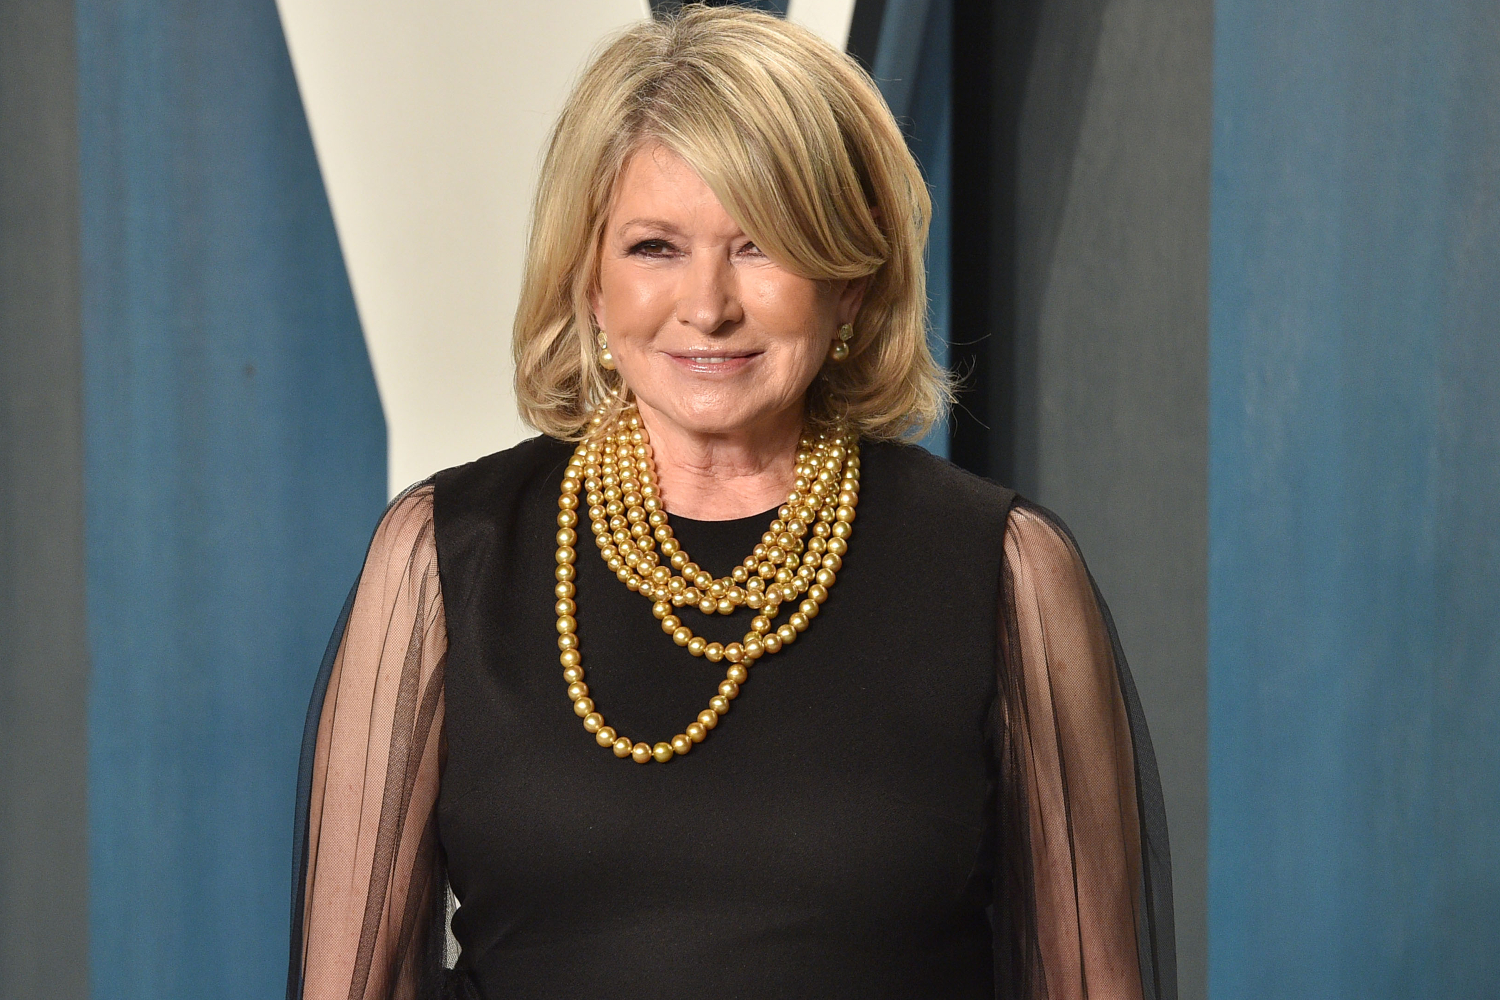 Martha Stewart poses in a black dress and gold necklace